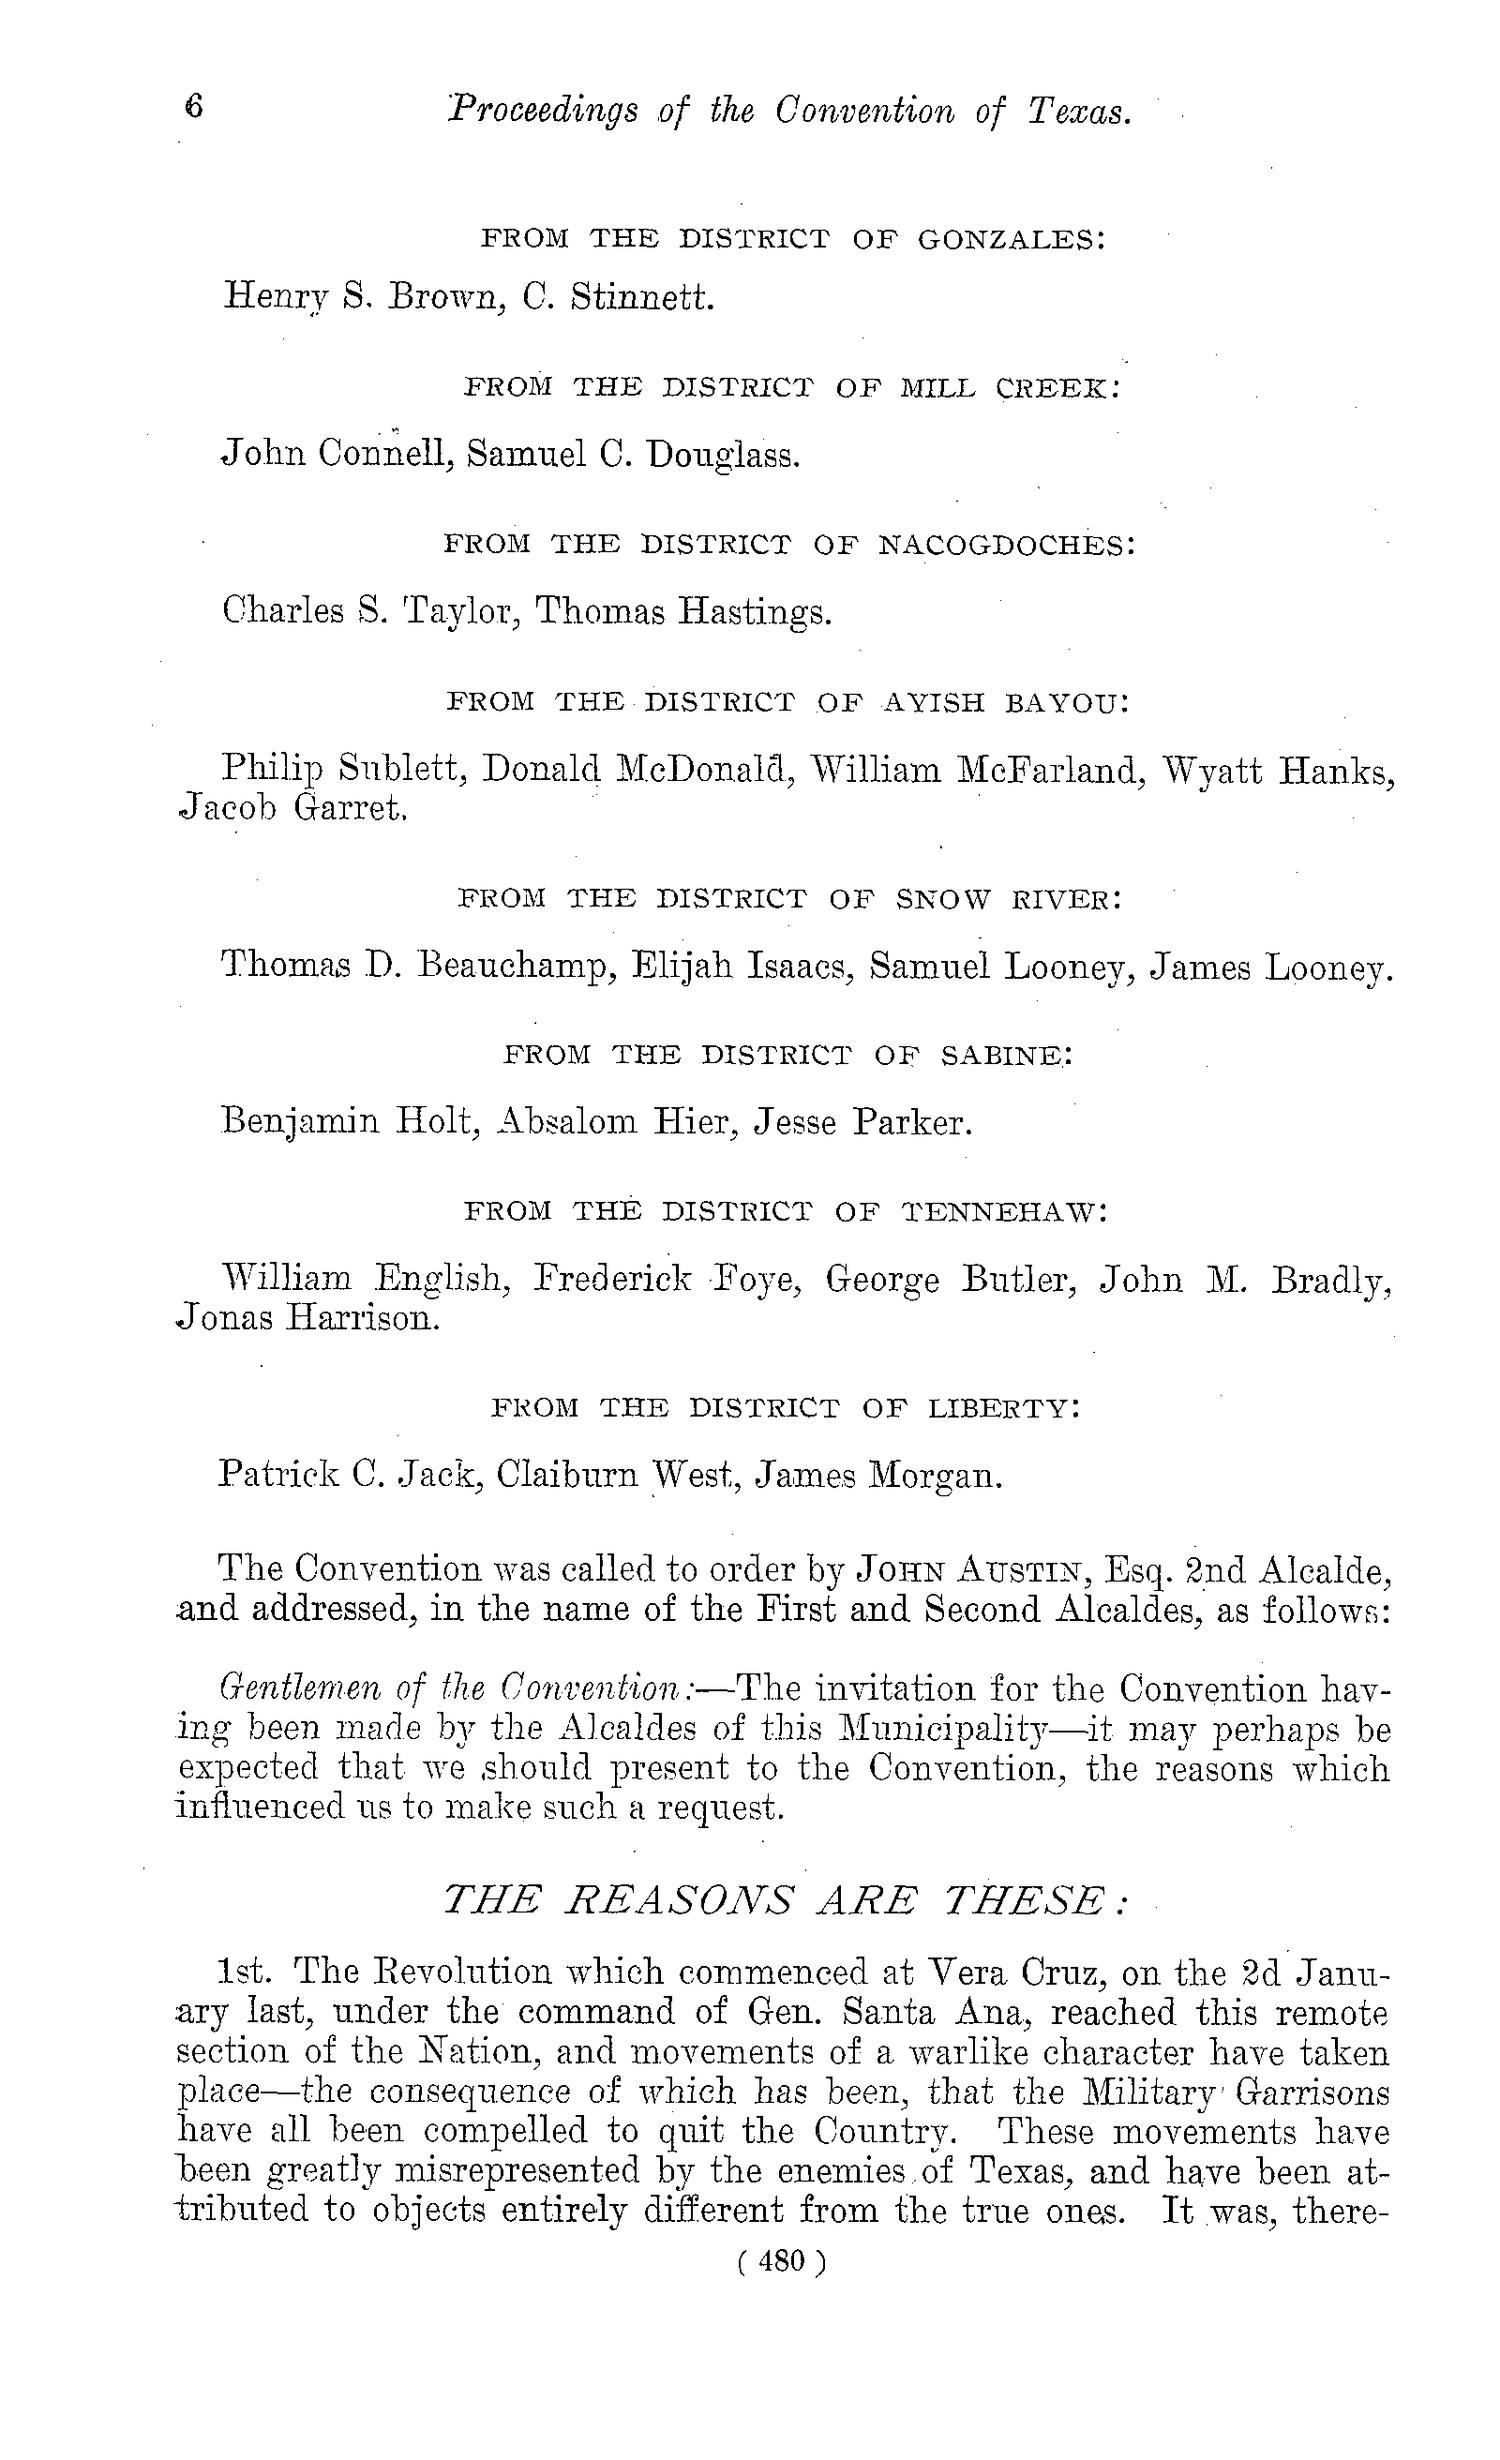 The Laws of Texas, 1822-1897 Volume 1
                                                
                                                    480
                                                